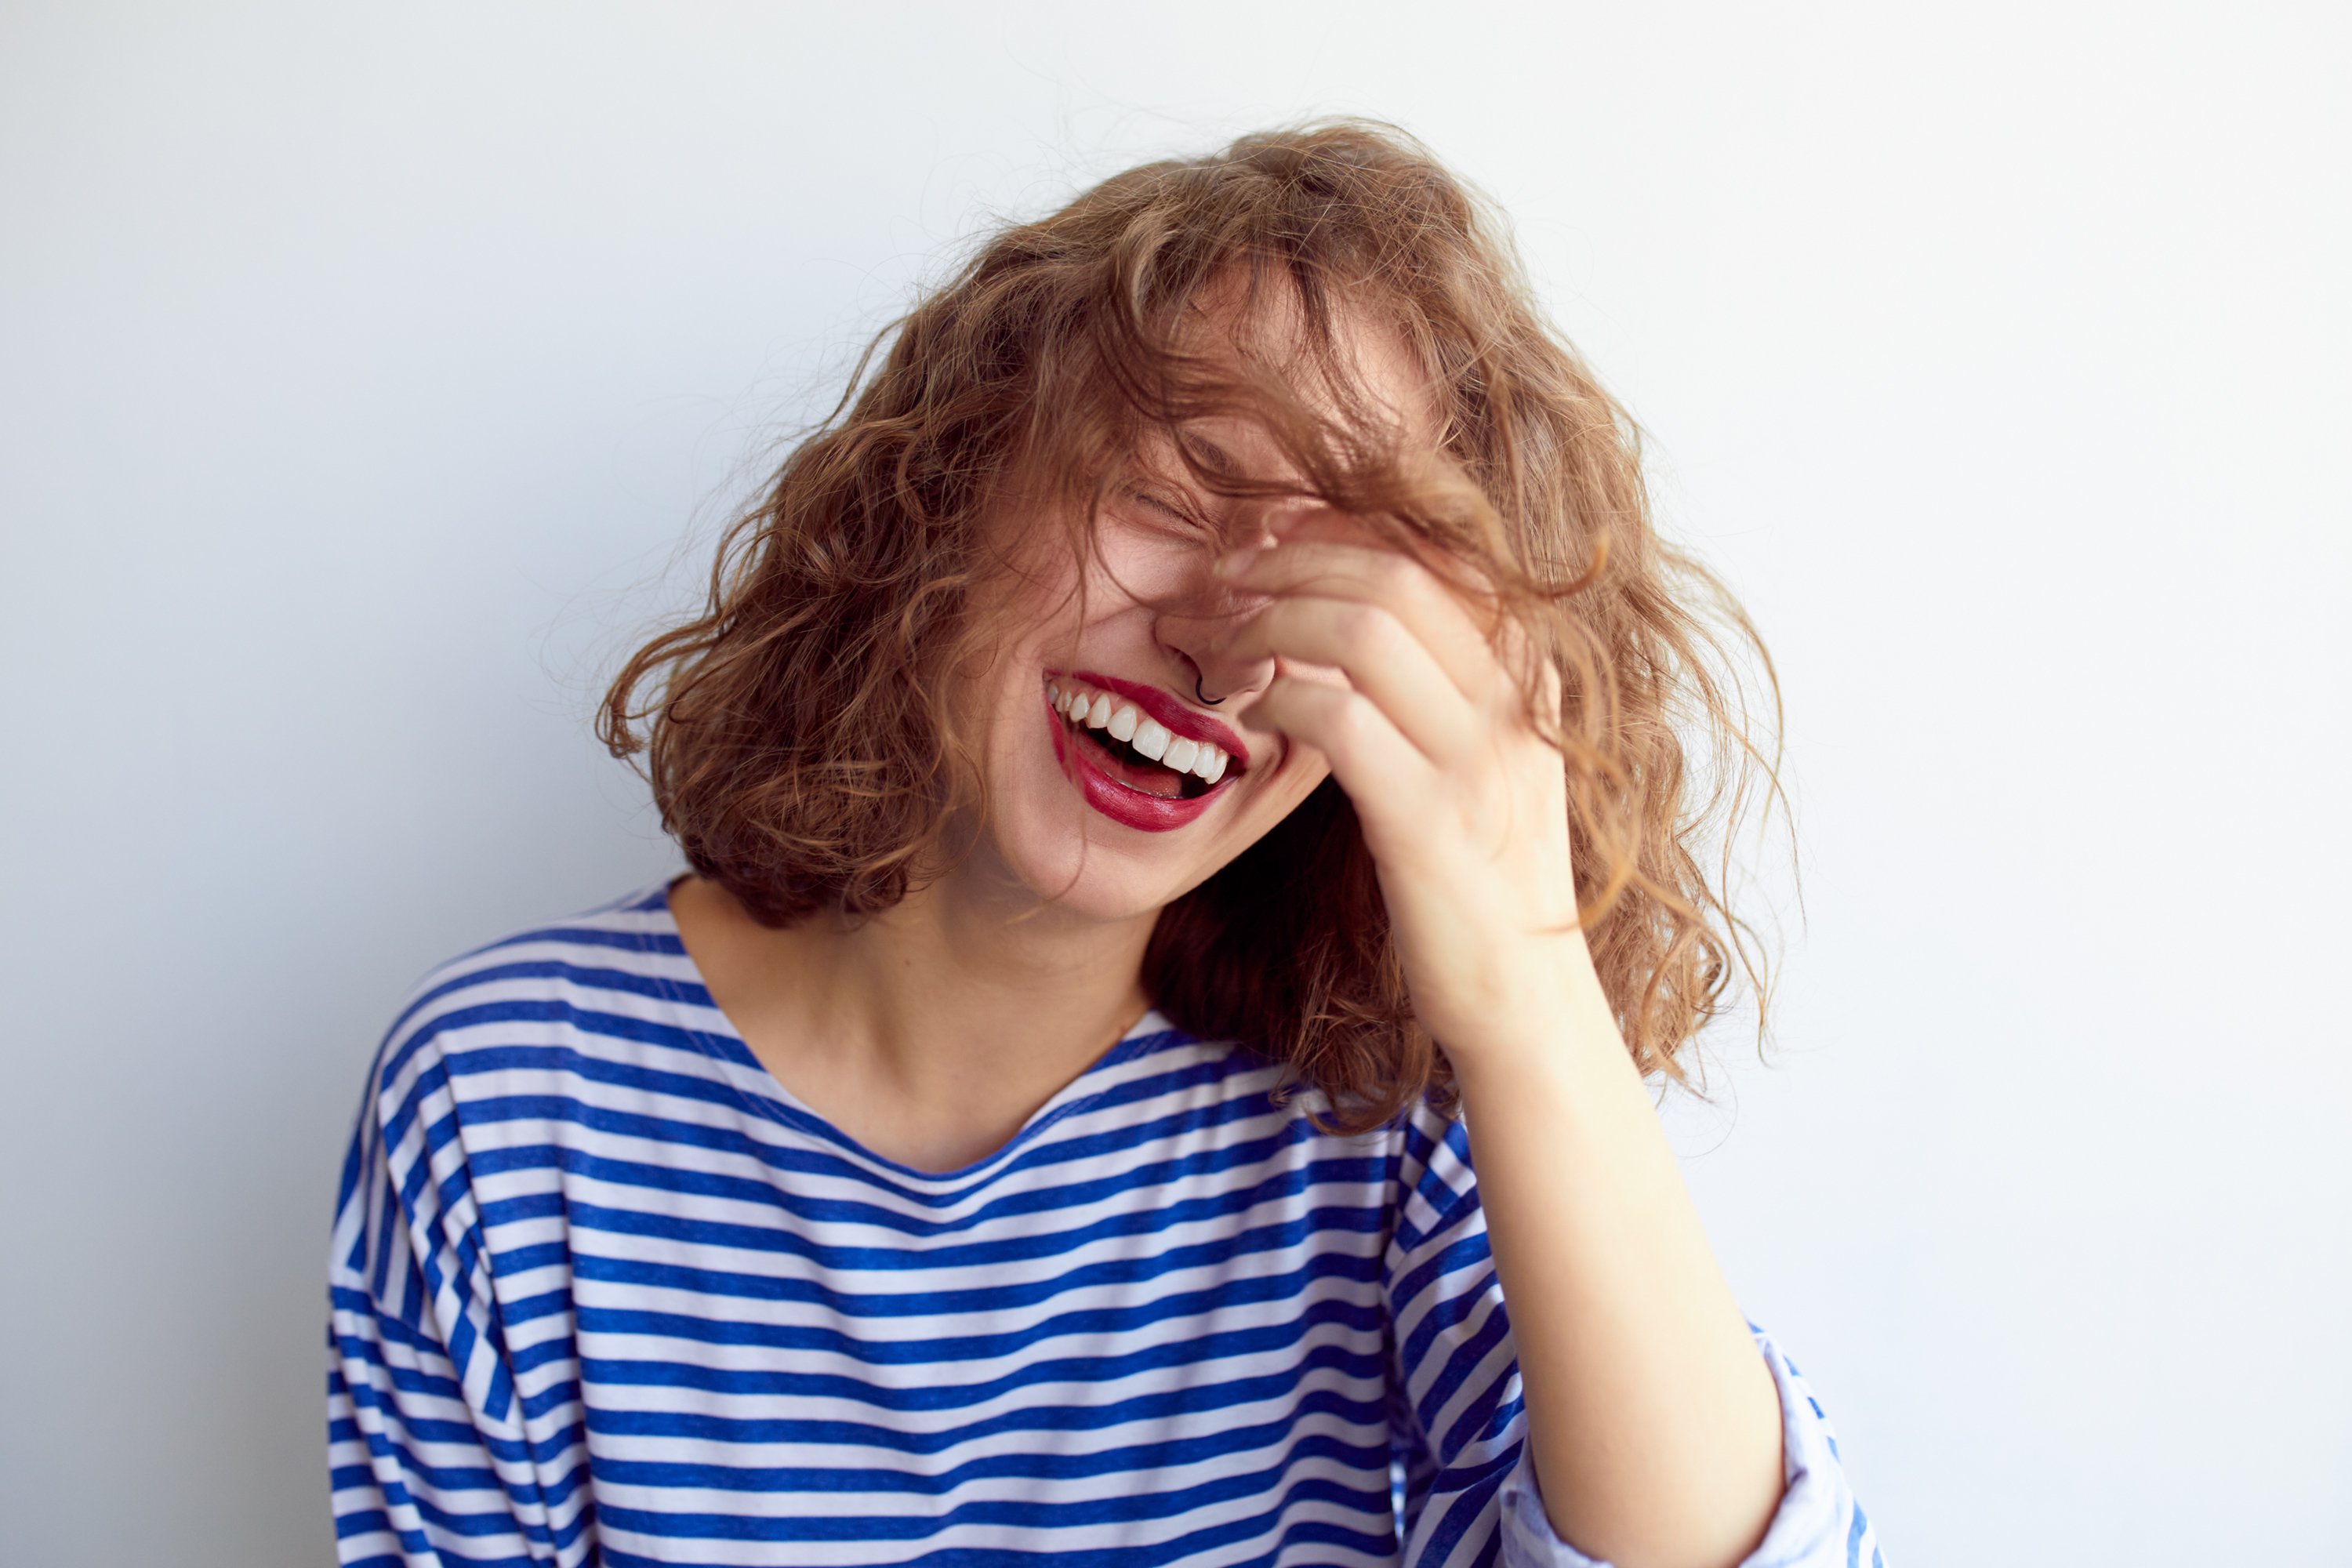 Woman in striped T-shirt laughing.|Source: Shutterstock